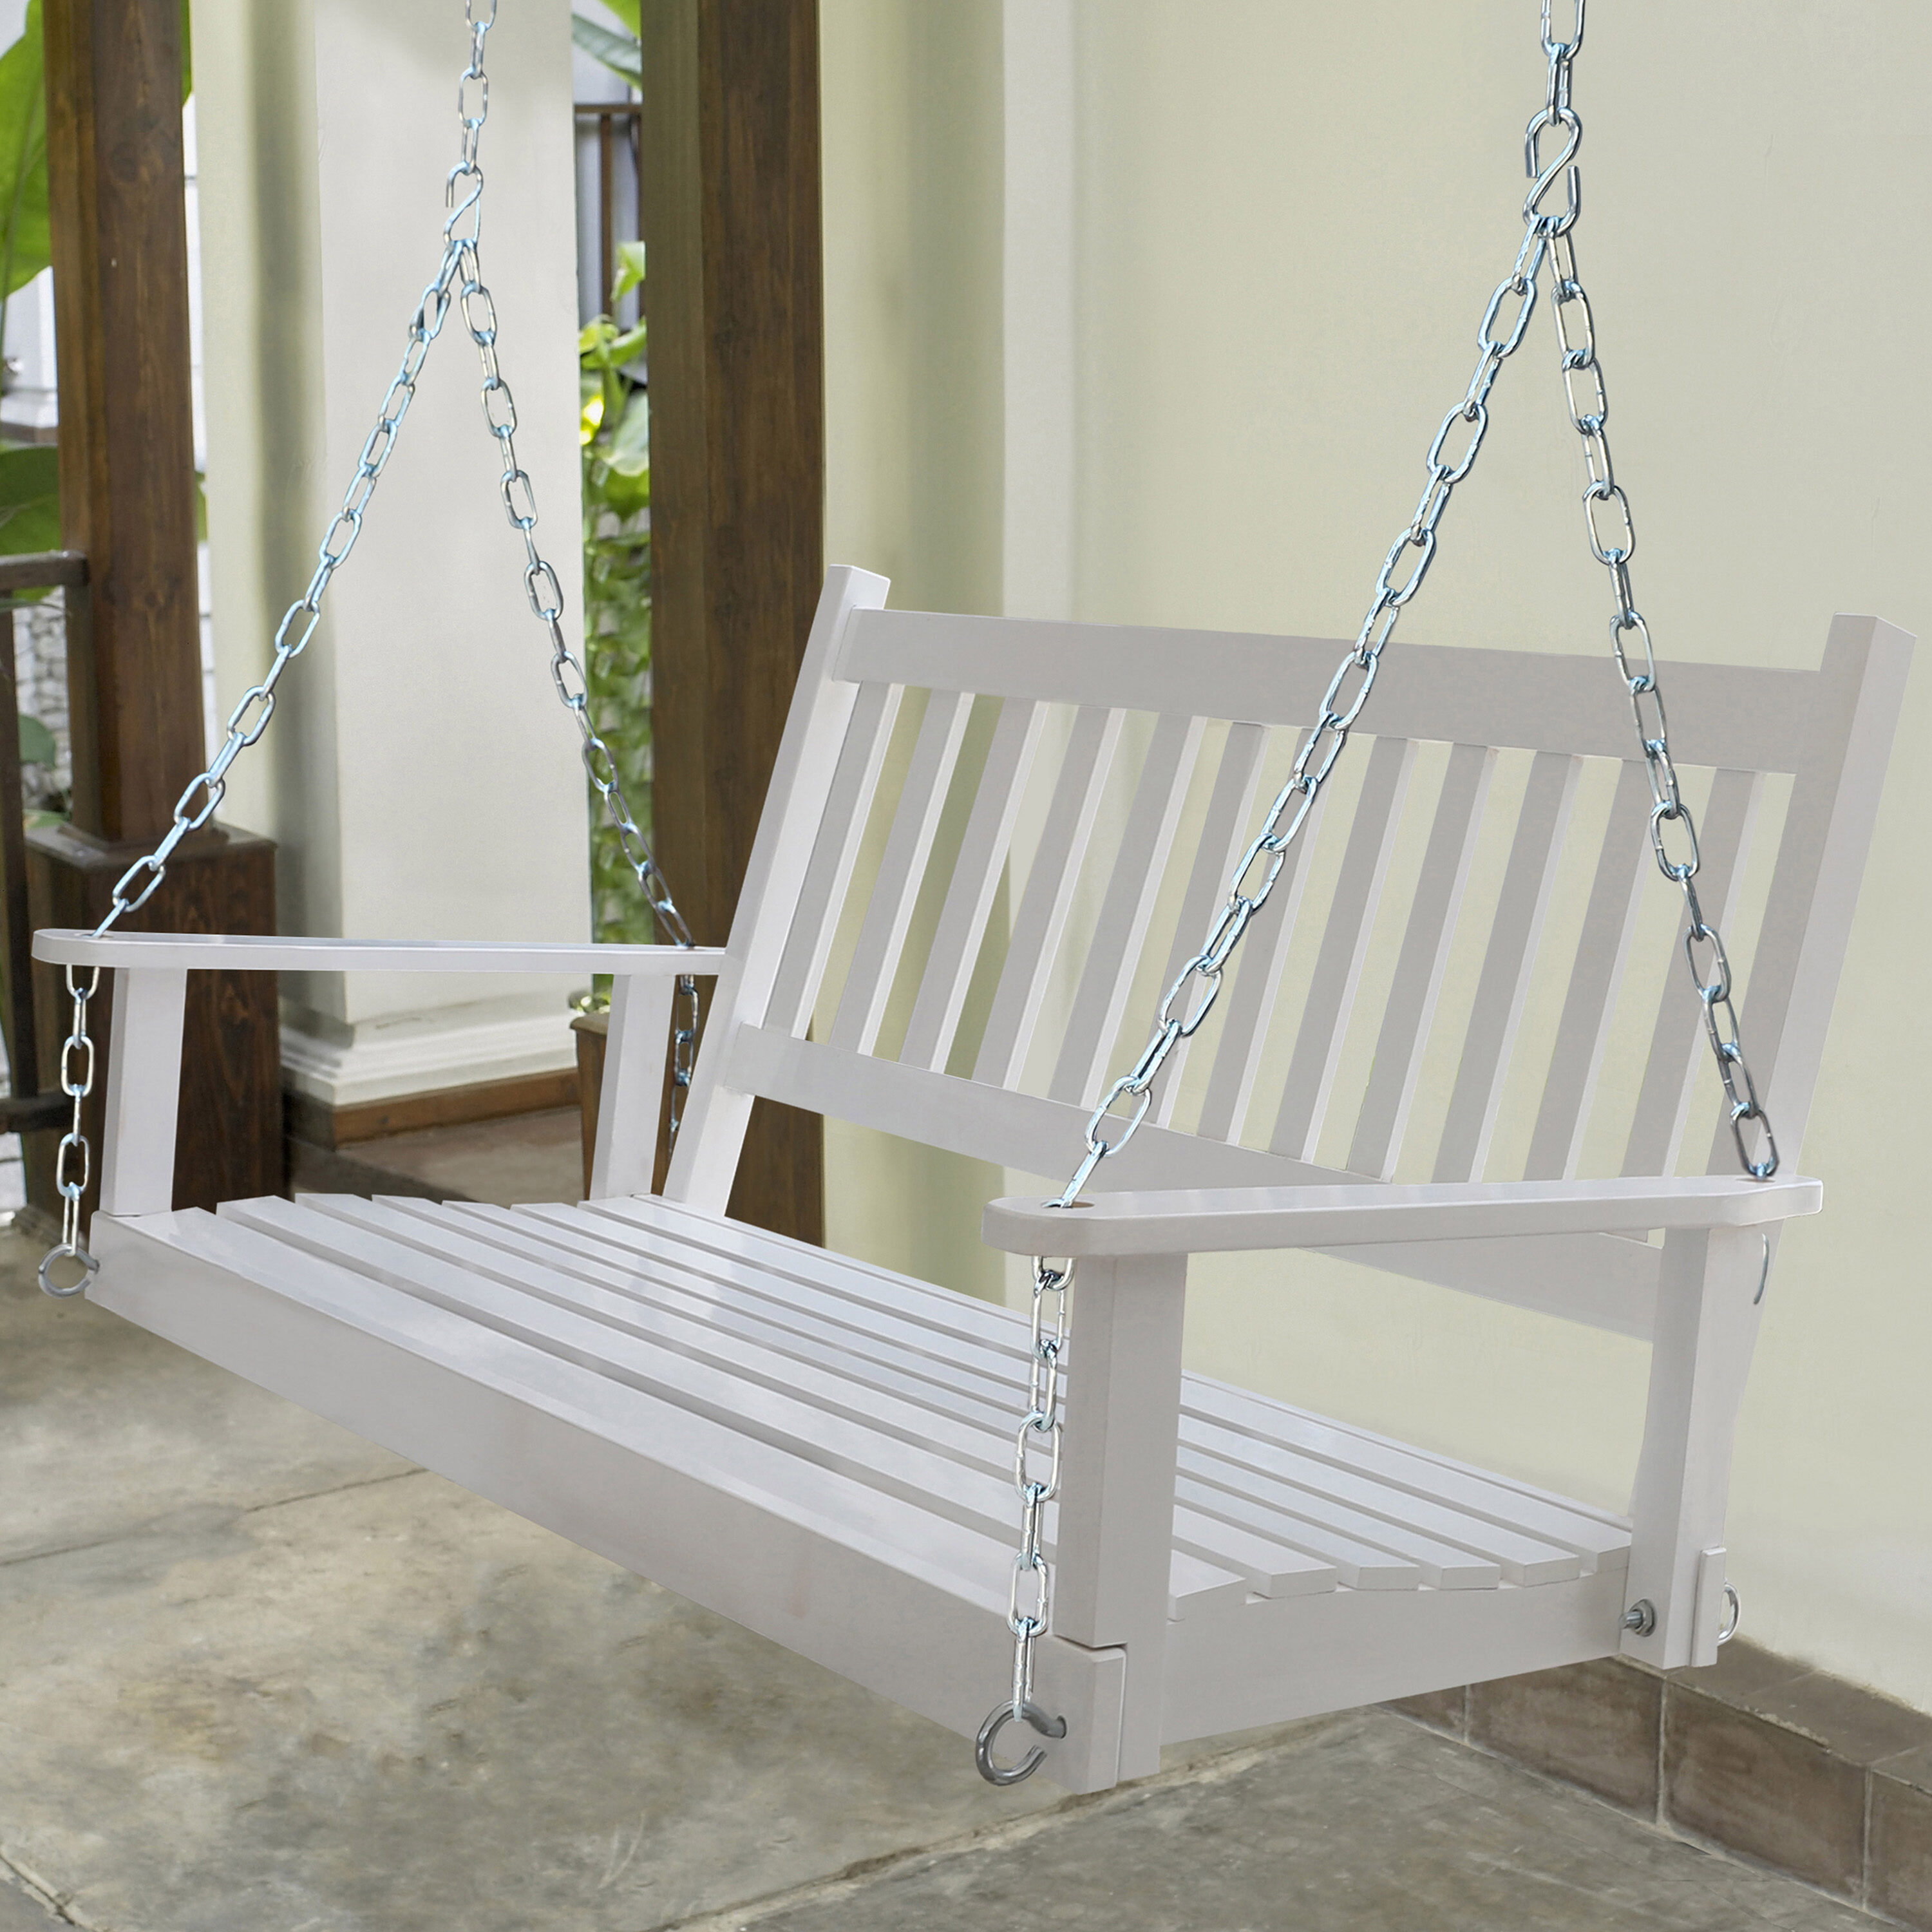 VEIKOUS 4 FT 2-person Natural Wood Outdoor Swing in the Porch Swings &  Gliders department at